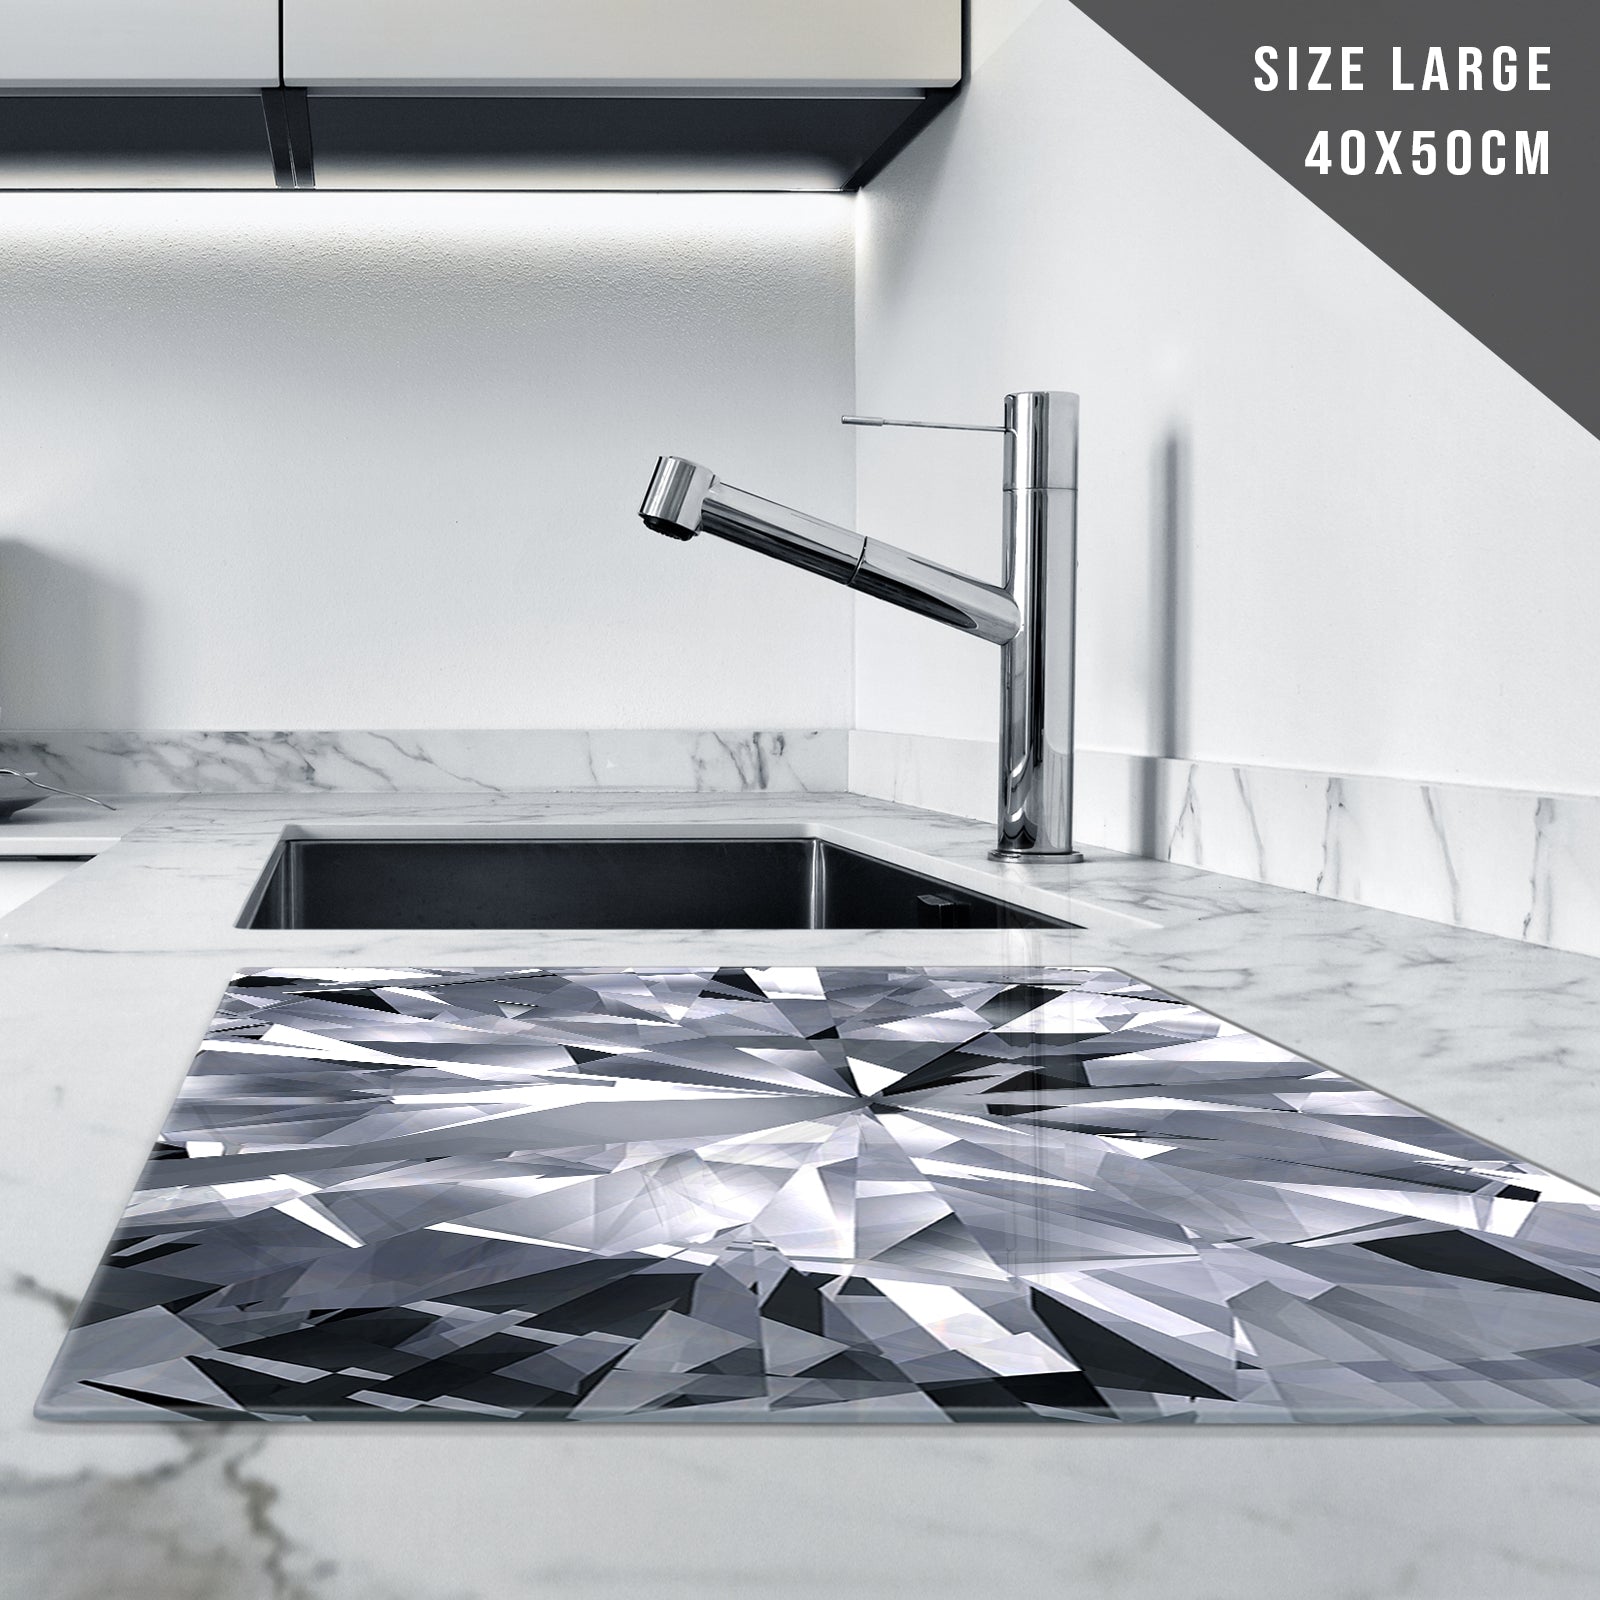 Glass Chopping Board for Kitchen in Grey White Black